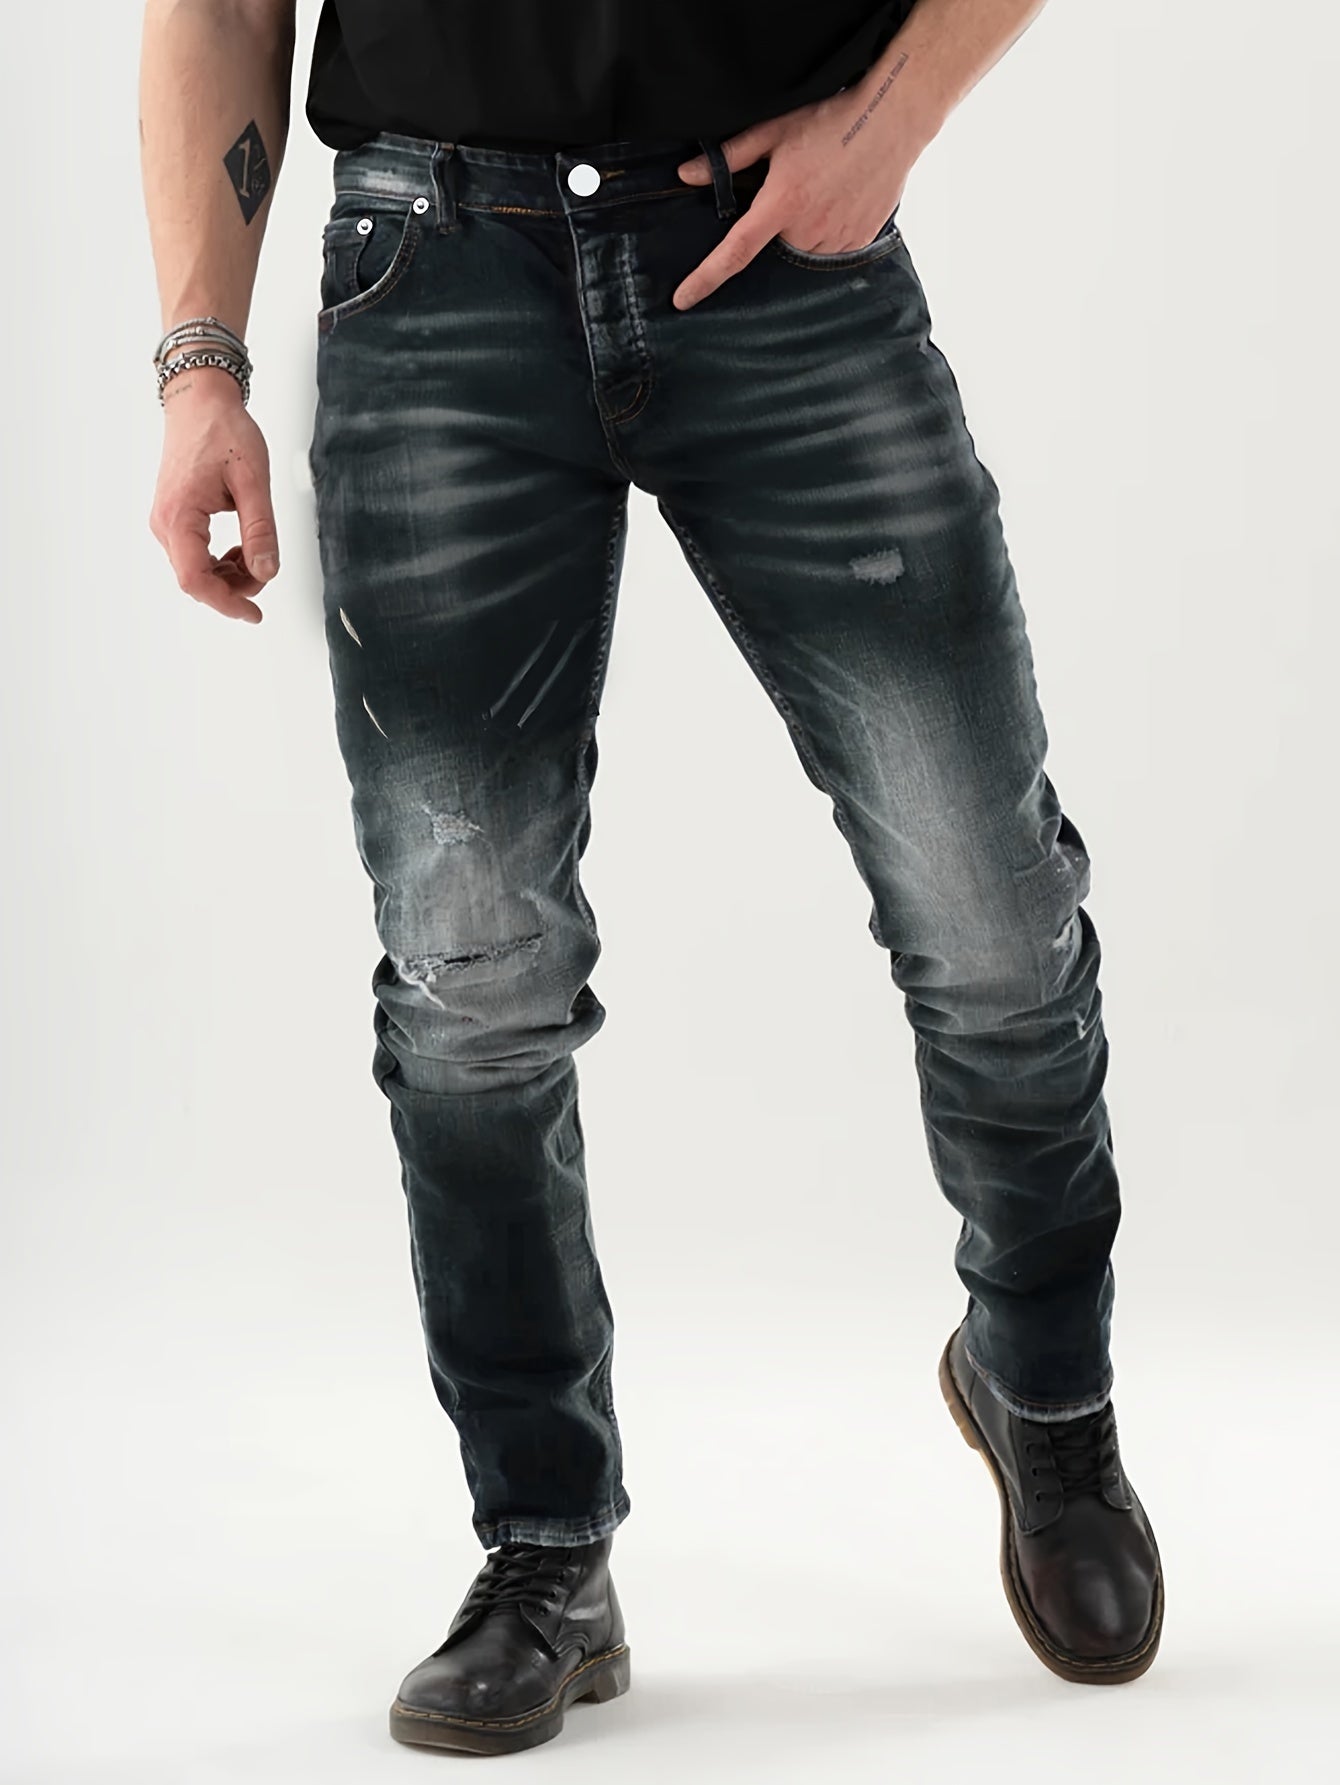 "Distressed Skinny Jeans for Men - Fashionable Street Style with Medium Stretch"